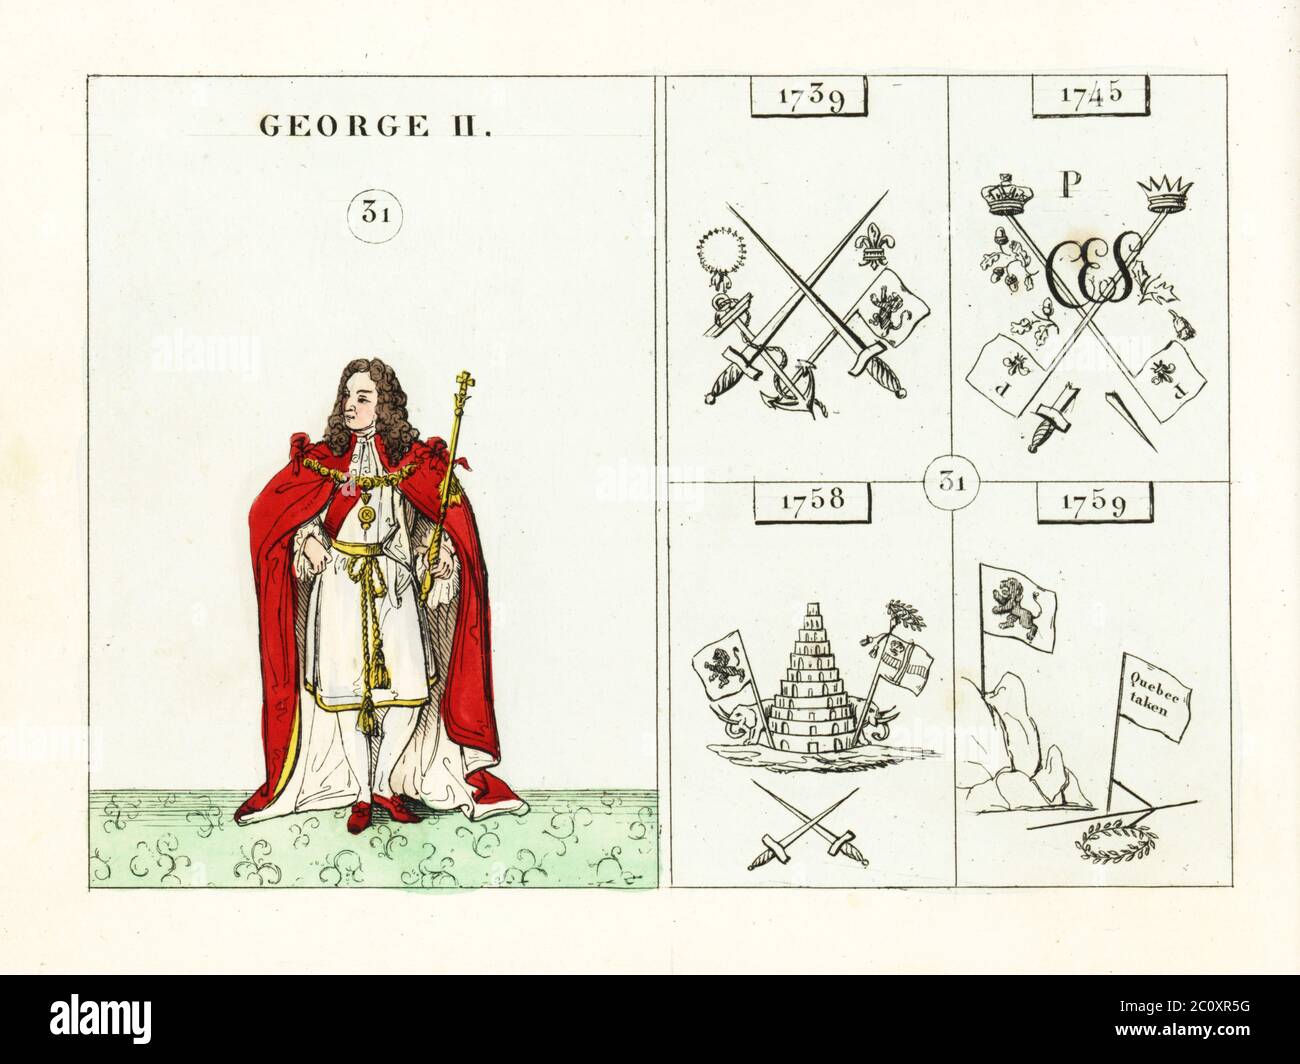 Portrait of King George II of England. In mantle, robe, sash and hose, with sceptre. Emblems indicate the War with Spain and France, defeat of the Pretender, victories in India, and death of General Wolfe at Quebec. Handcoloured steel engraving after an illustration by Mary Ann Rundall from A Symbolical History of England, from Early Times to the Reign of William IV, J.H. Truchy, Paris, 1839. Mary Ann Rundall was a teacher of young ladies in Bath, and published her book of mnemonic emblems in 1815. Stock Photo